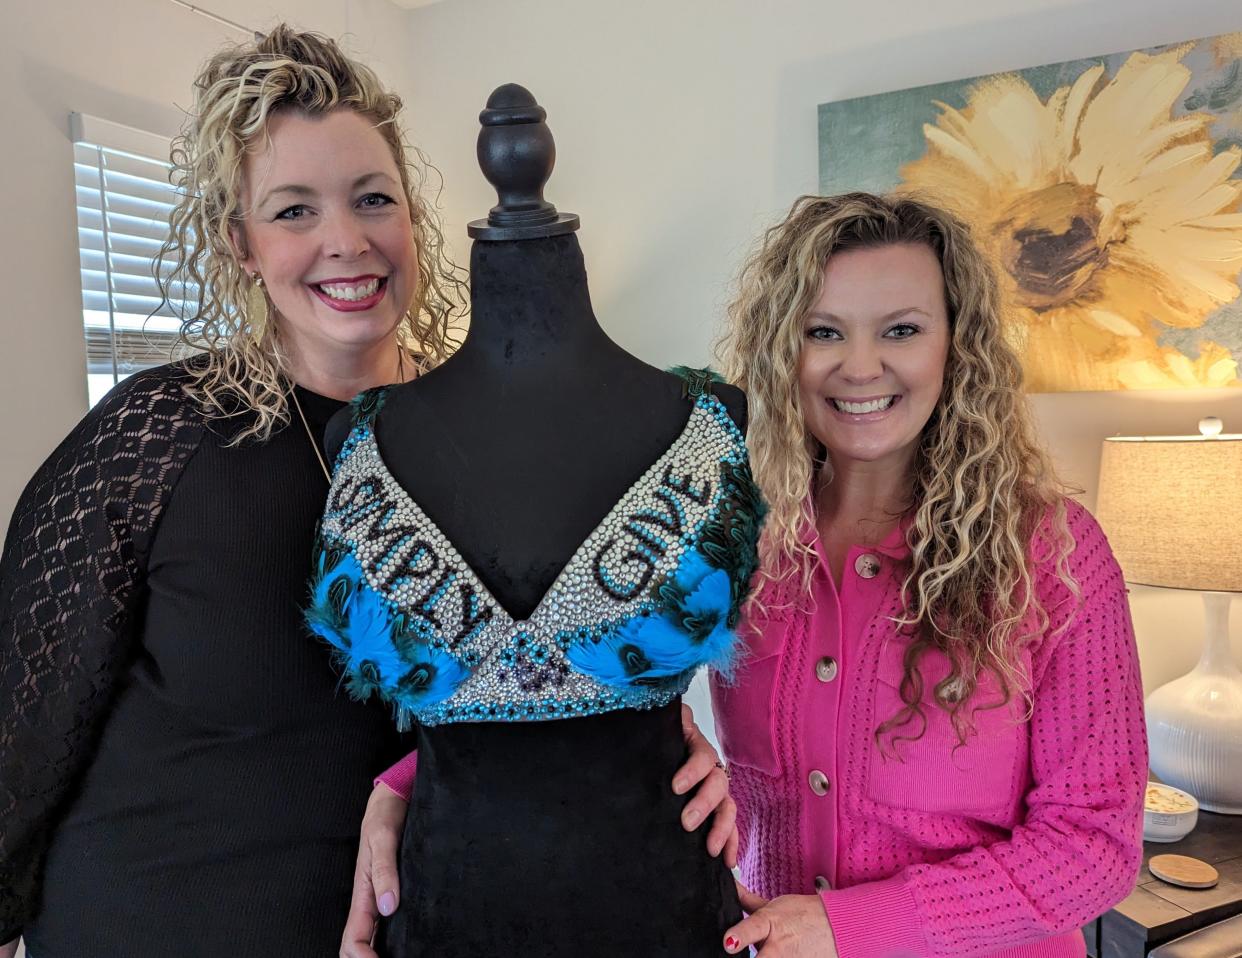 Jamey Pete (left) of Plain Township and Simply Give founder Alivia Hershberger of North Canton are celebrating the nonprofit's 10th anniversary by hosting a "Mardi Bra" fundraiser on Feb. 22. Their aim is to collect 10,000 in-kind donations for women.